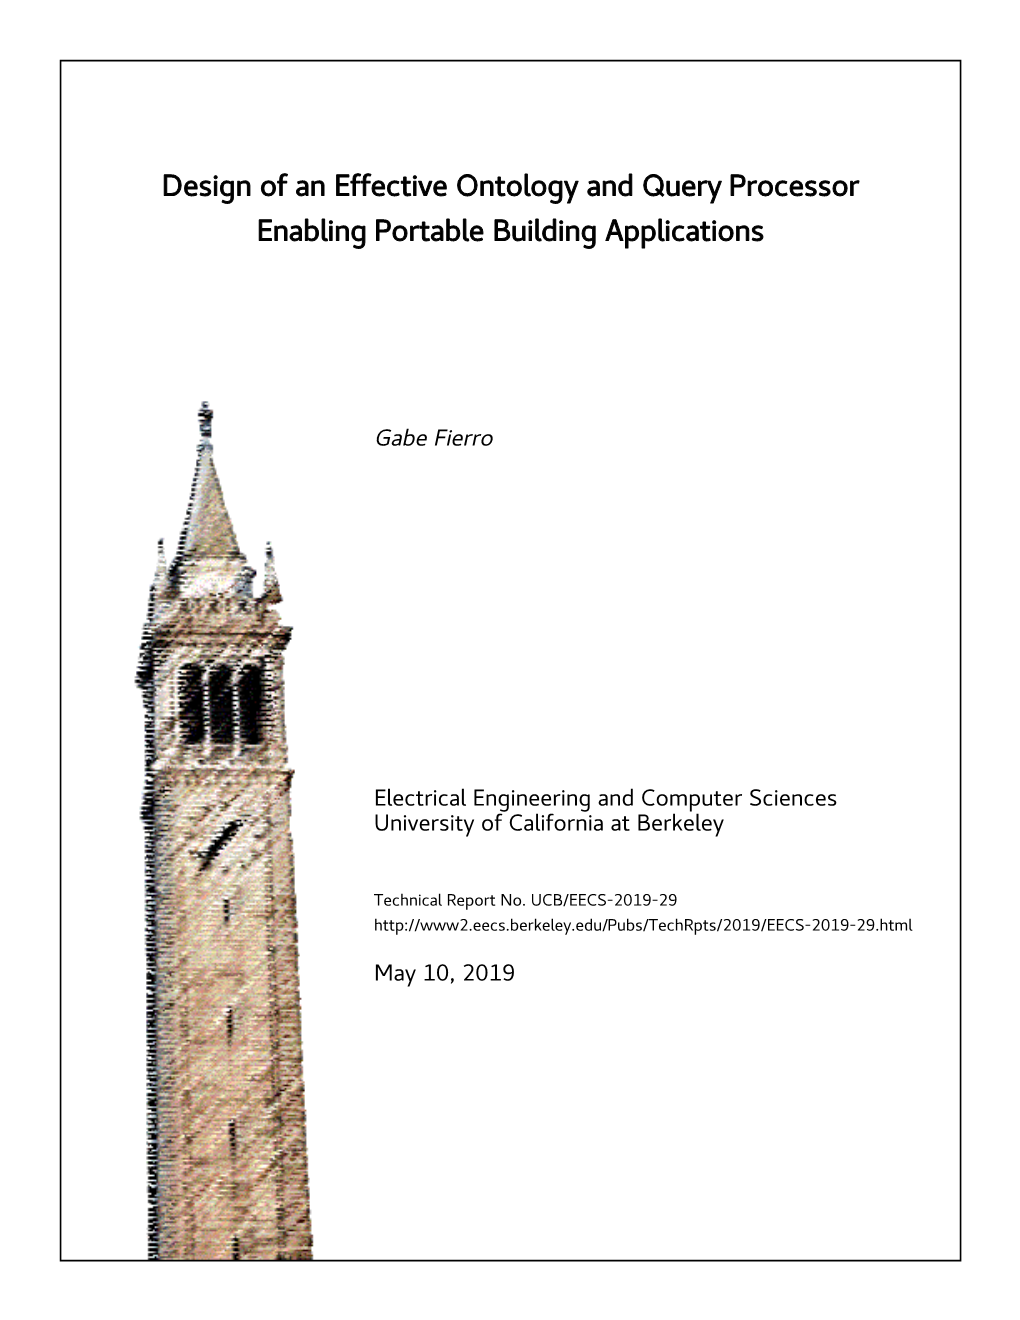 Design of an Effective Ontology and Query Processor Enabling Portable Building Applications